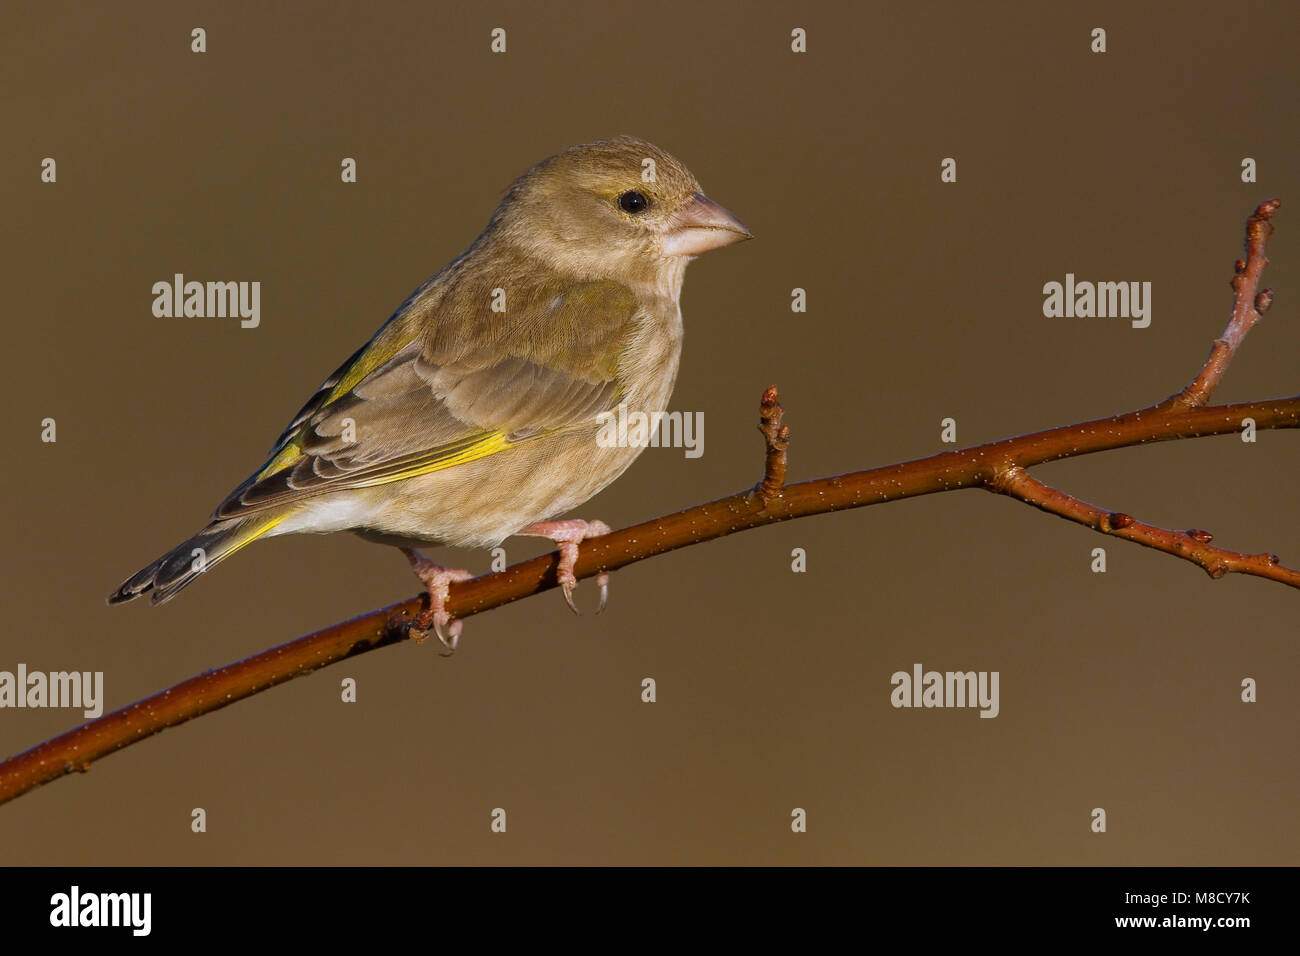 Vrouwtje Groenling; Female European Greenfinch Stock Photo